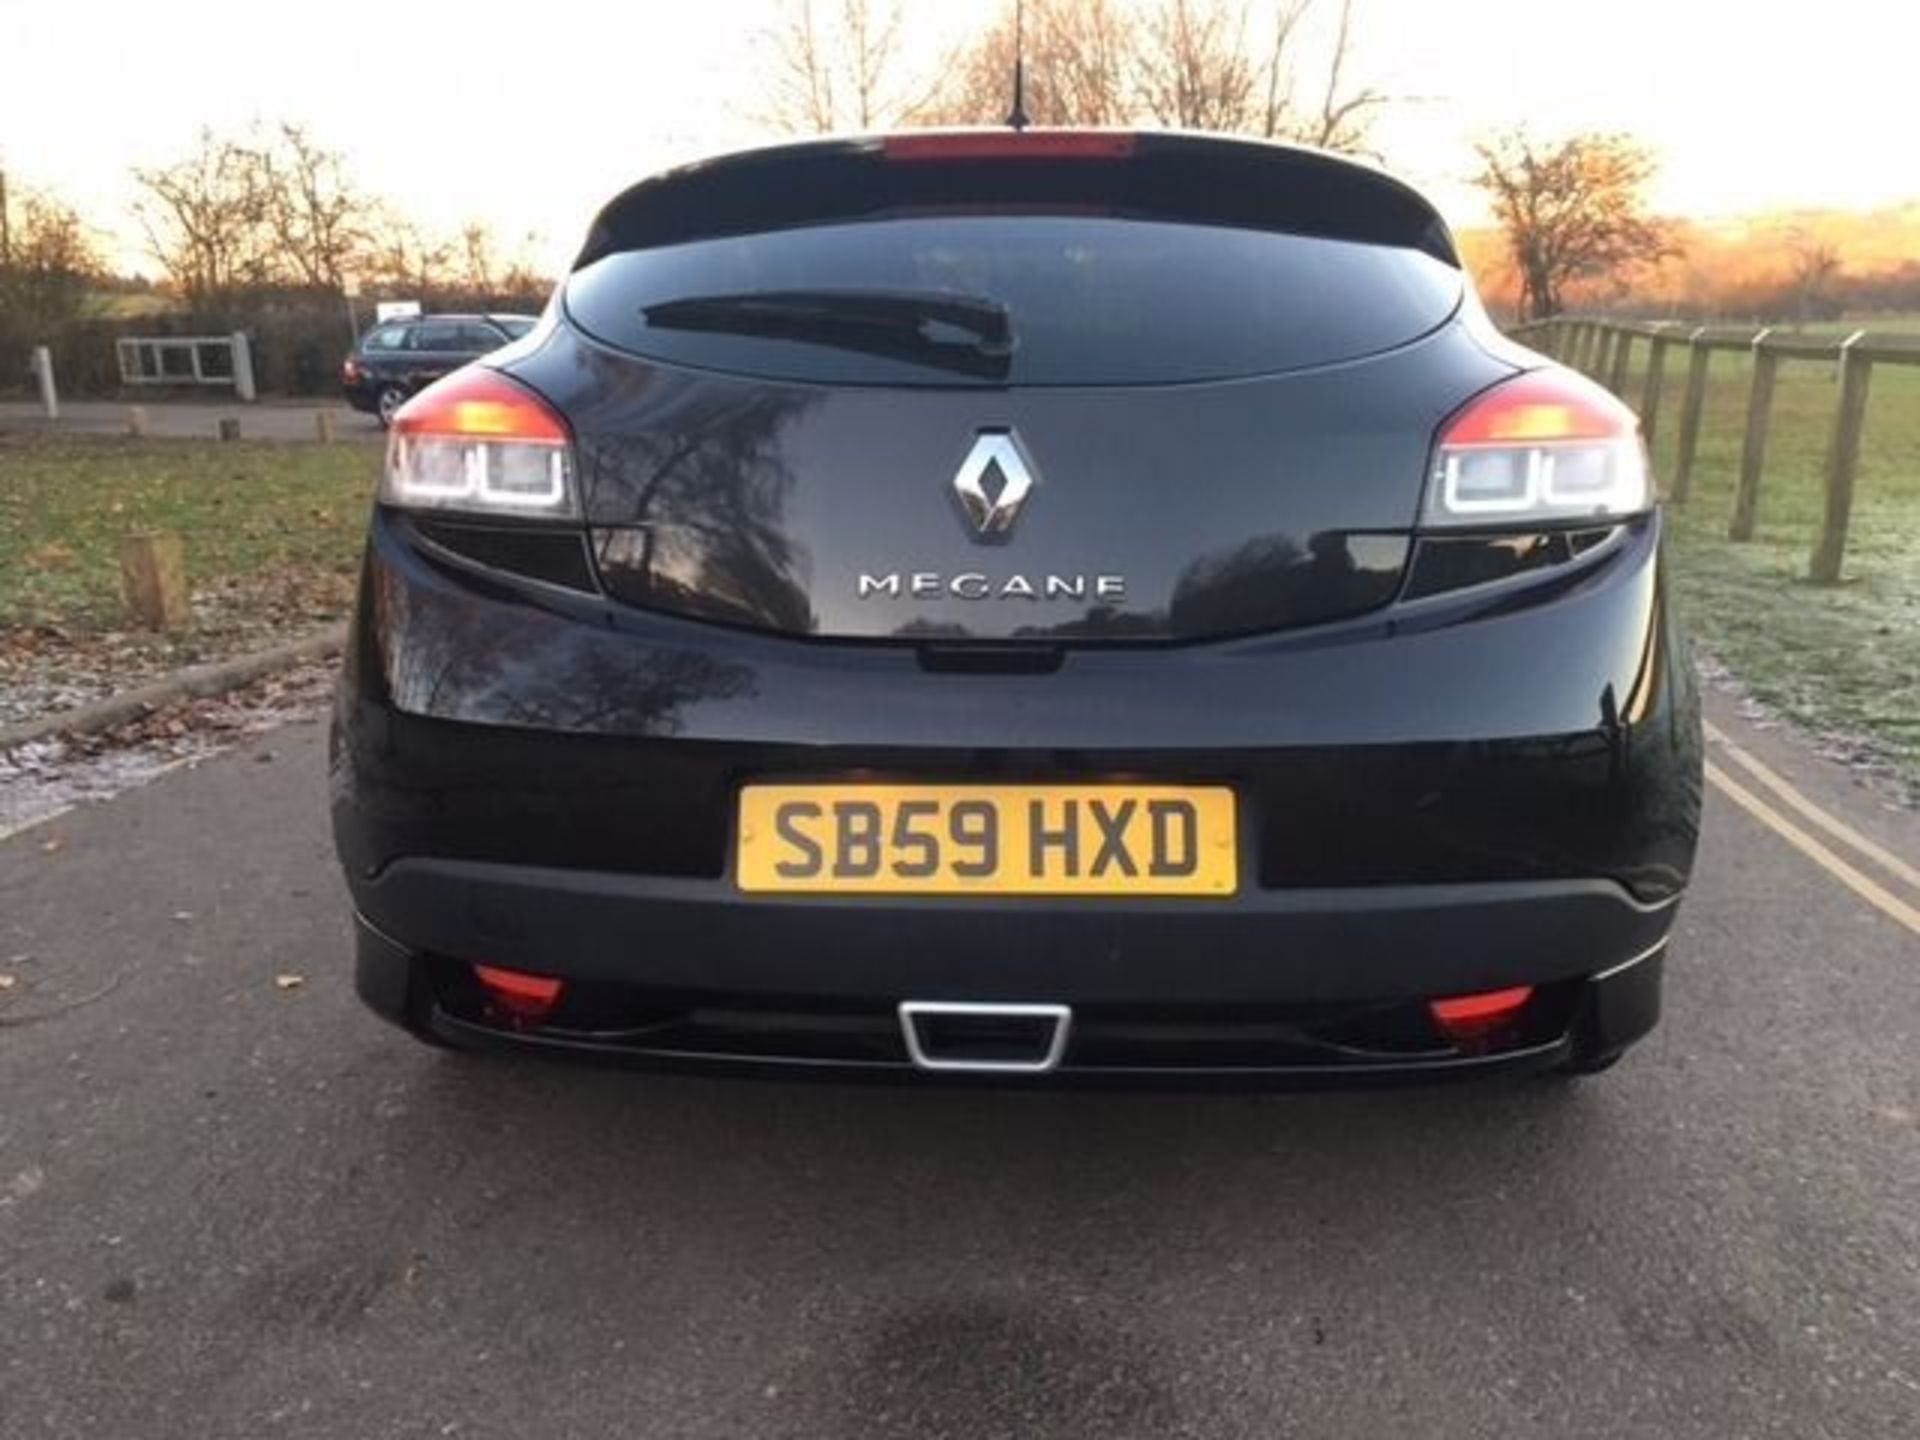 2009 RENAULT MEGANE 1.6 EXPRESSION VVT 110 BHP WITH RS BODY STYLING KIT. 55K MILES 12 MONTHS MOT. - Image 3 of 9